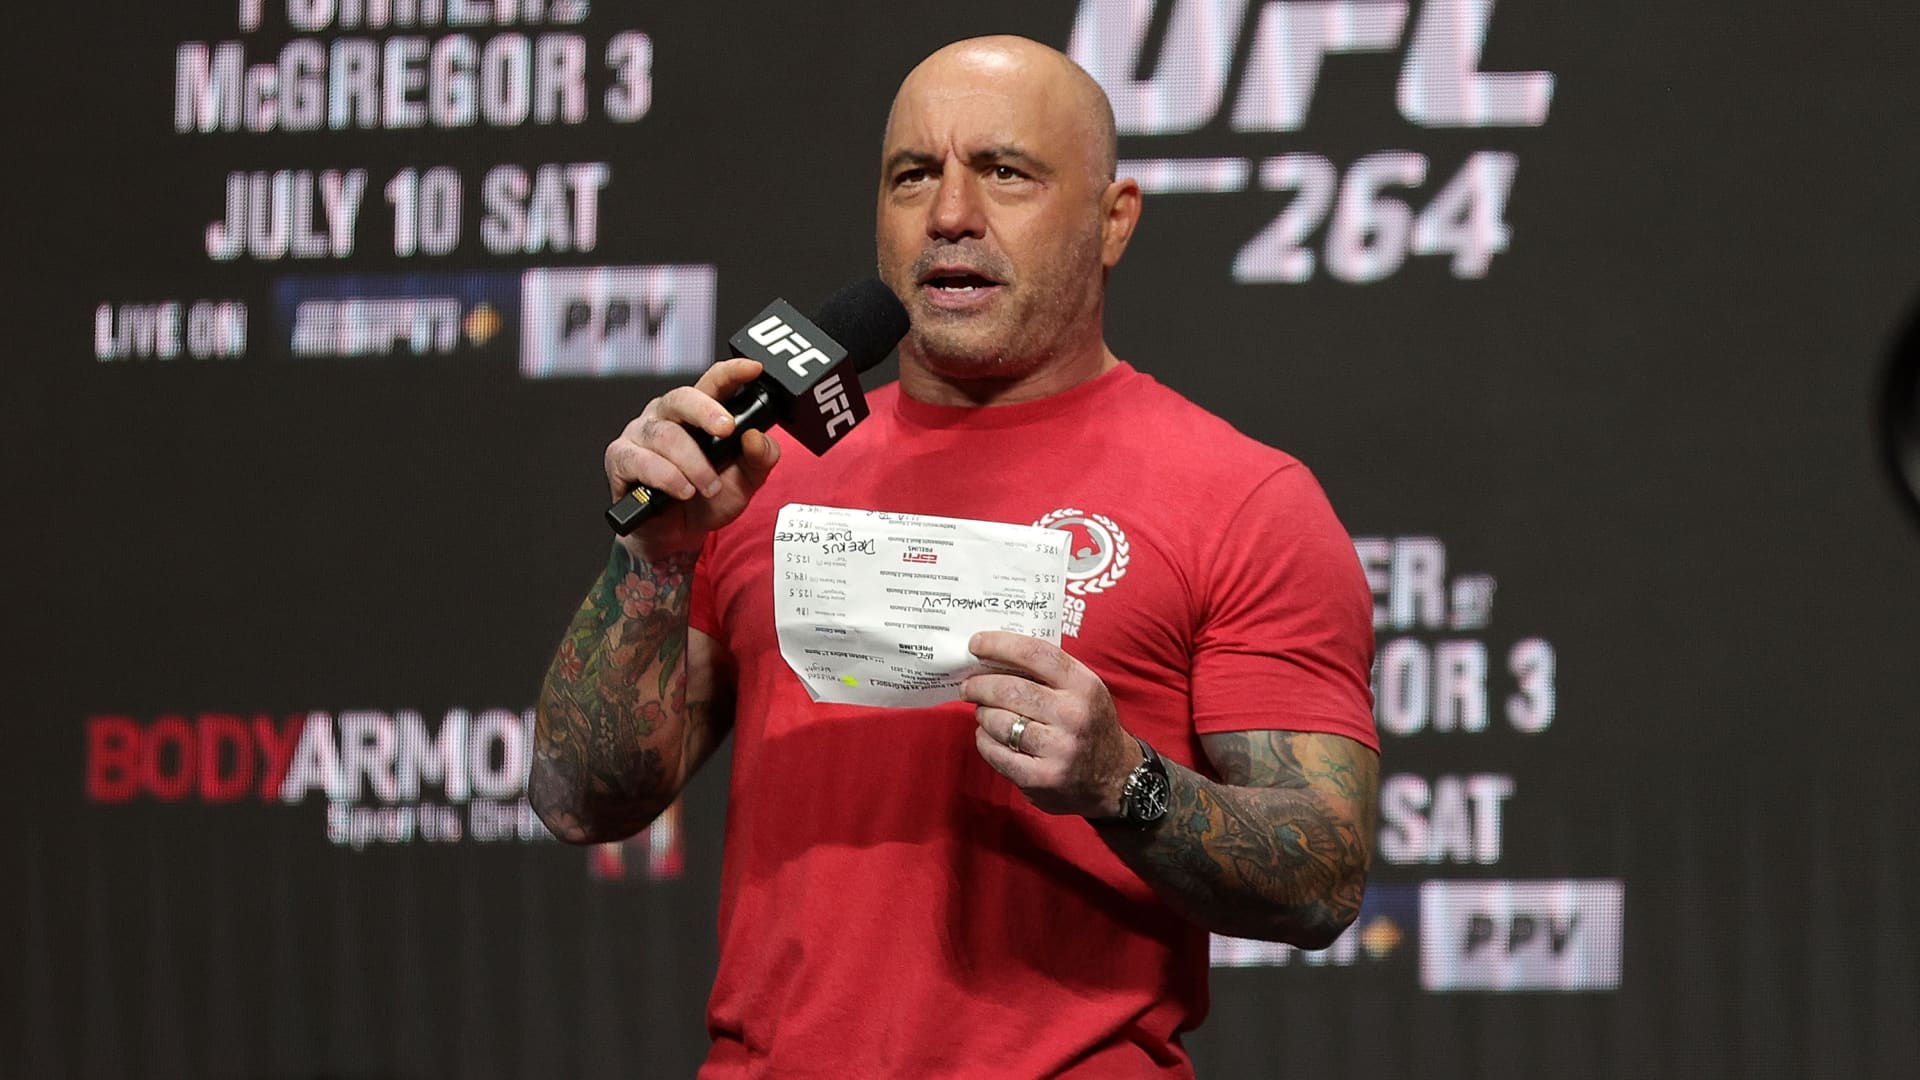 Joe Rogan announces the fighters during a ceremonial weigh in for UFC 264 on Jul. 9, 2021 in Las Vegas, Nevada.